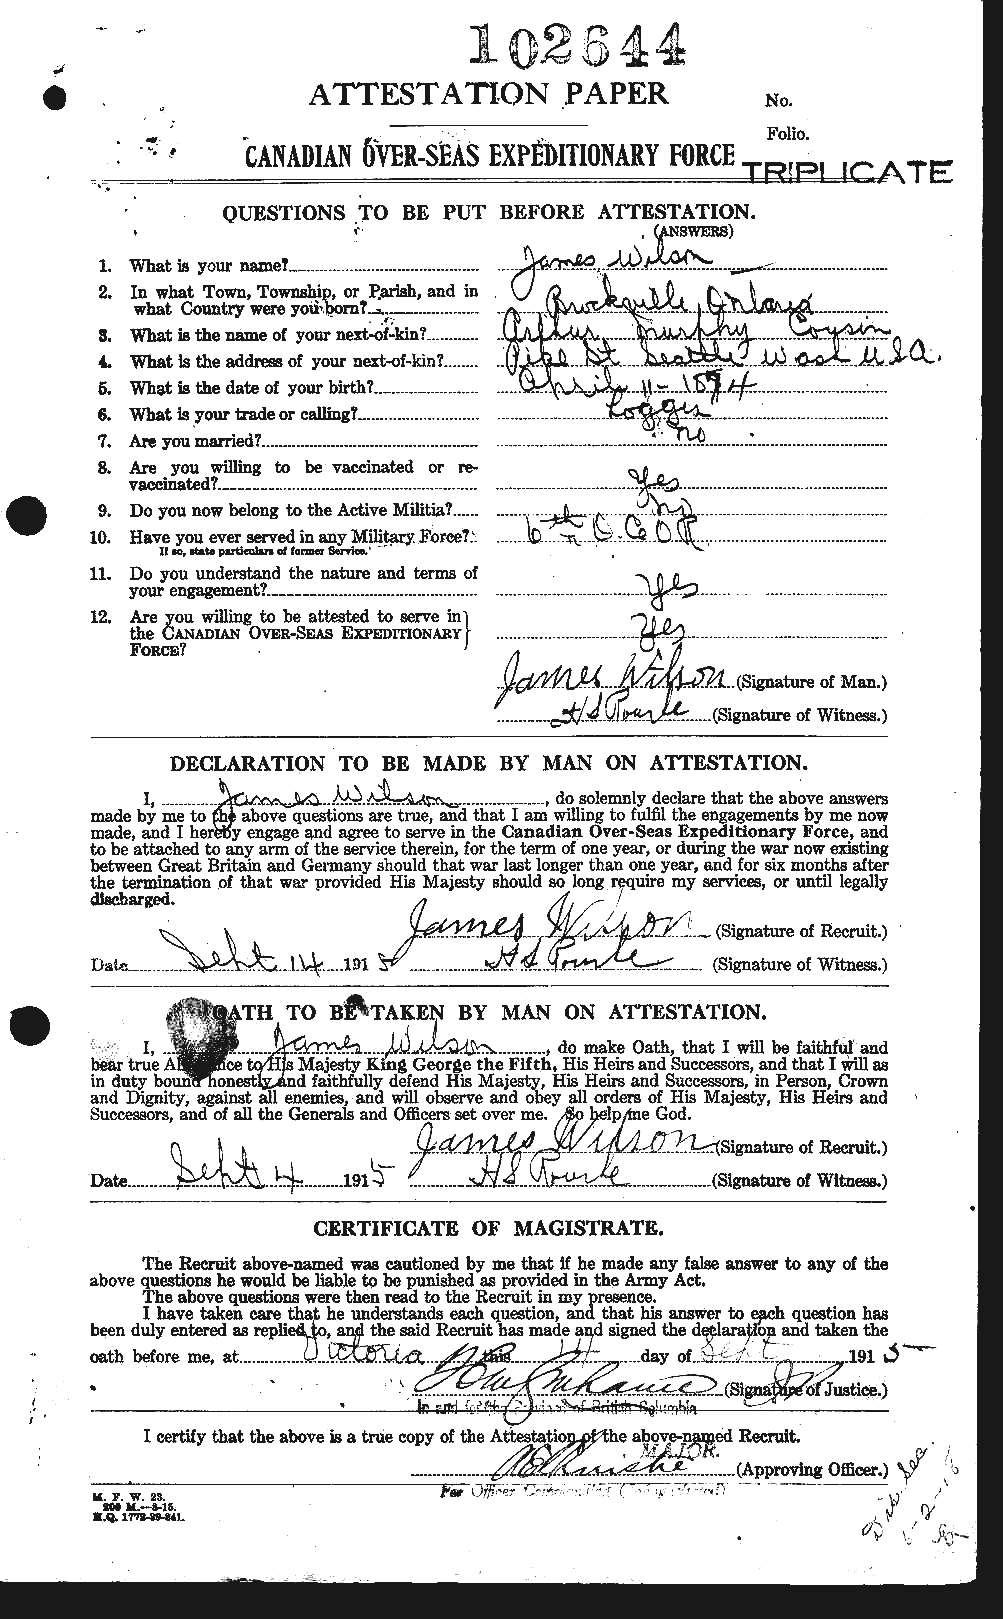 Personnel Records of the First World War - CEF 681373a